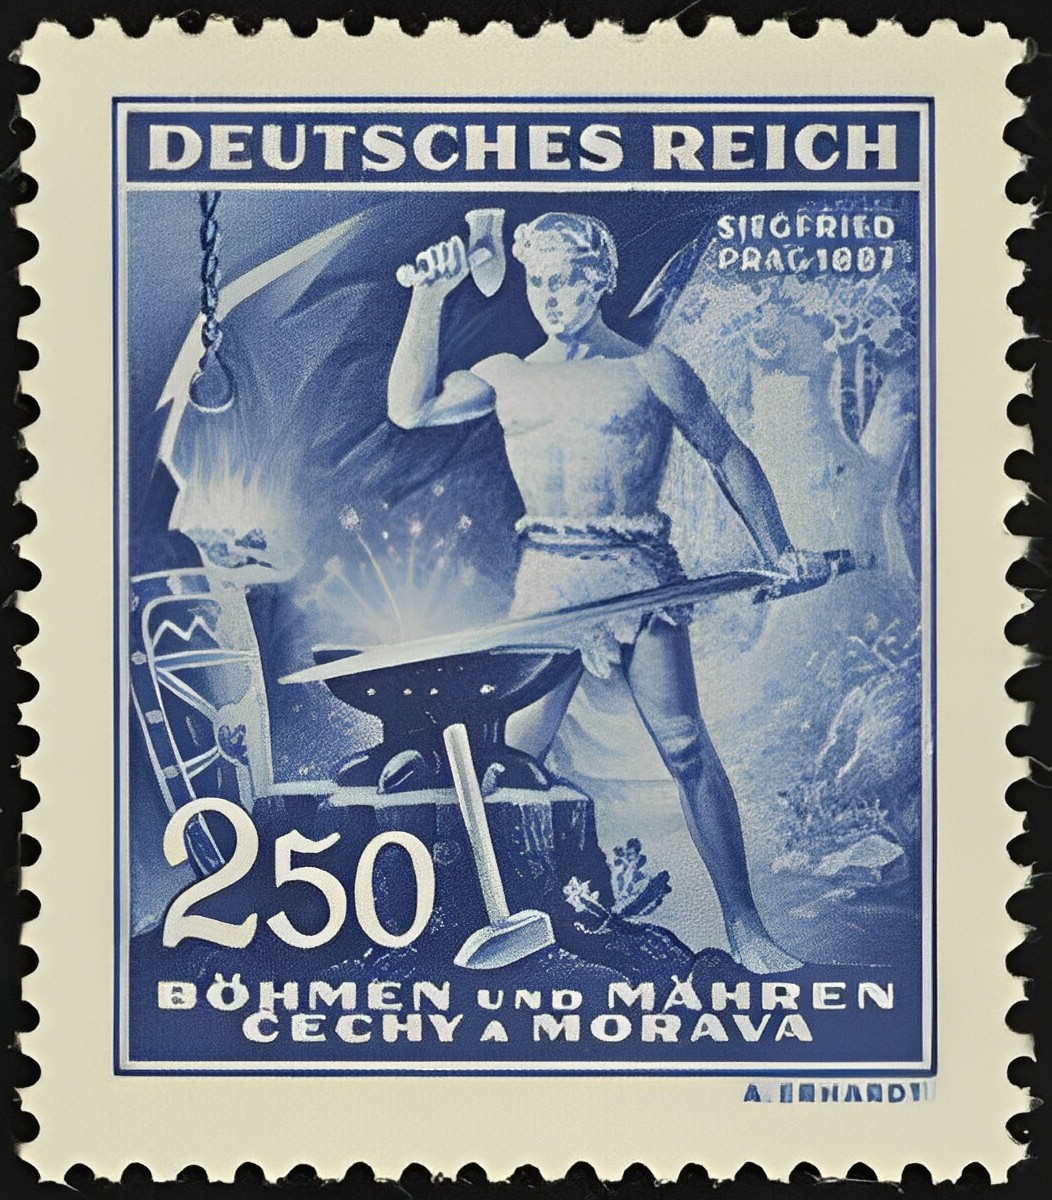 [5/10]
A 1943 Richard Wagner Commemoration Stamp, also from the Protectorate. It depicts Siegfried, from Der Ring des Nibelungen - a cycle of four epic music dramas including famous compositions such as Götterdämmerung or the Ride of the Valkyries